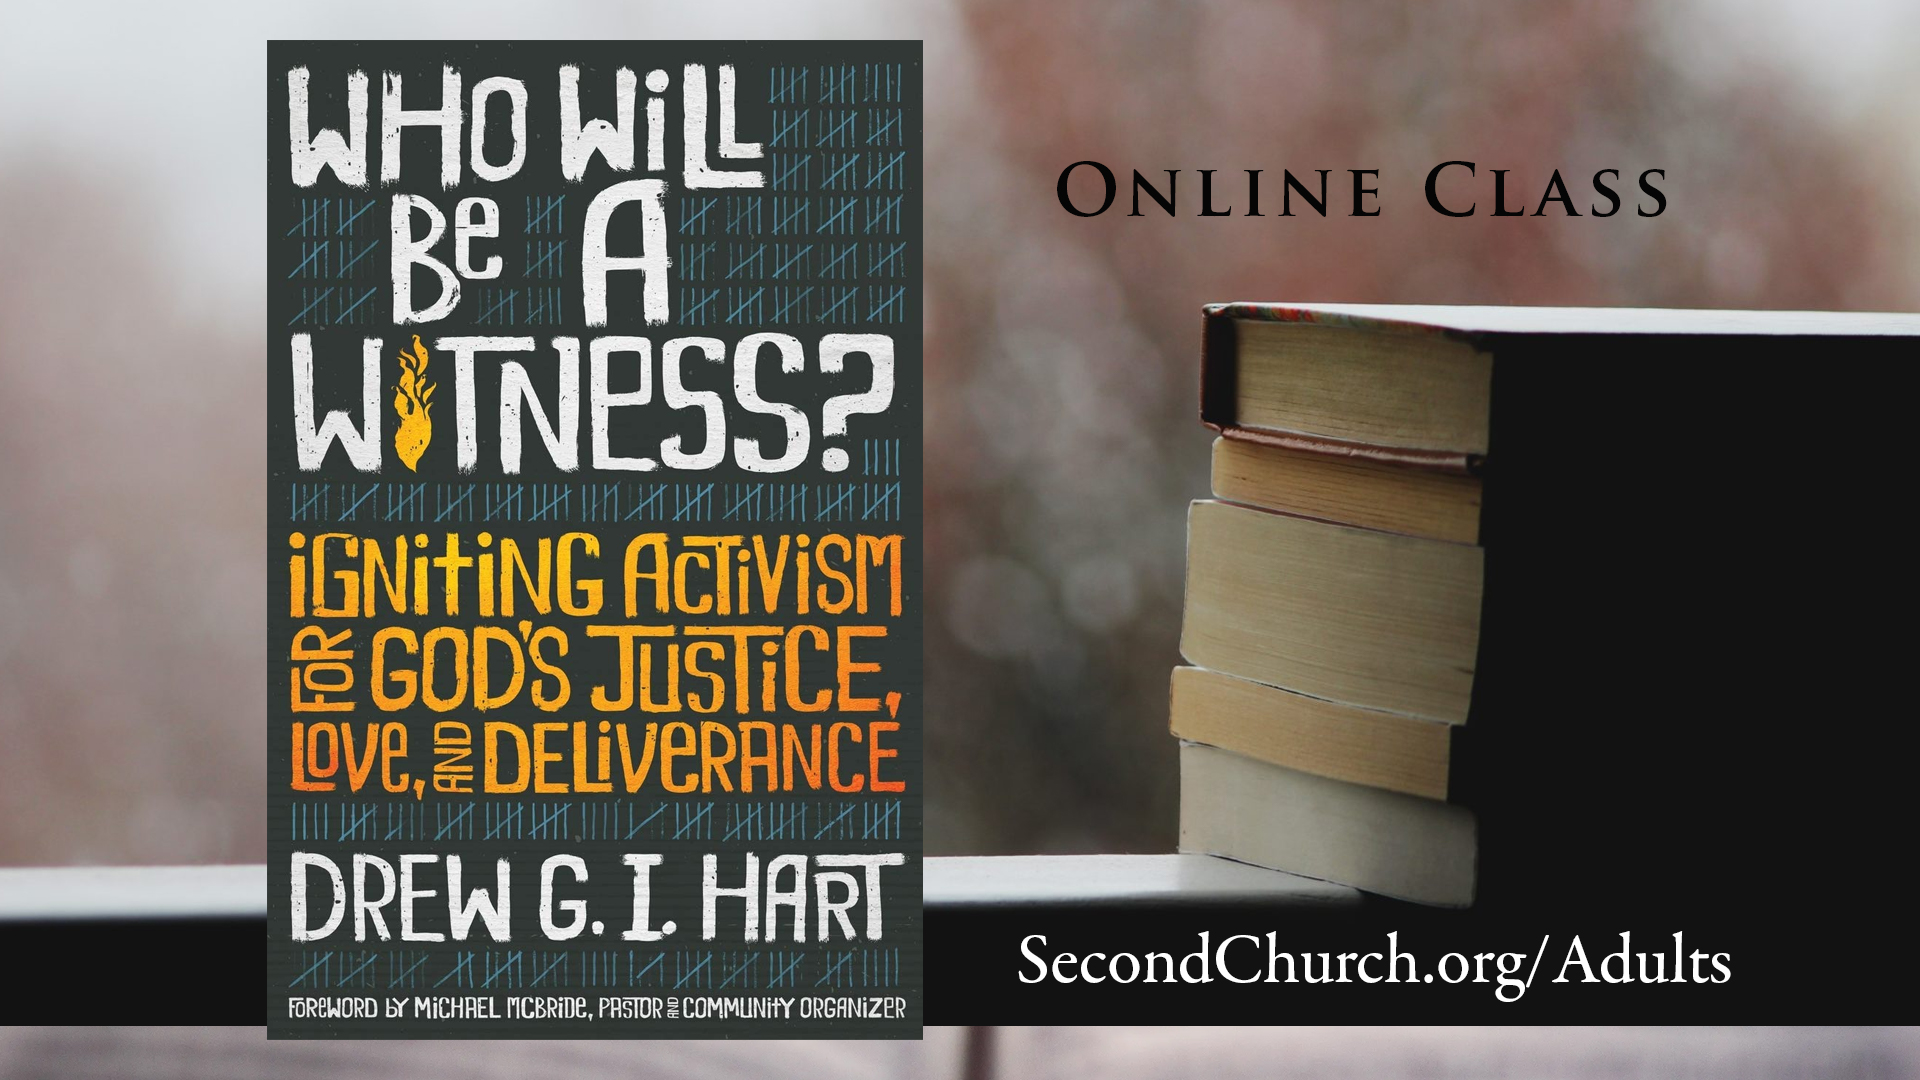 Who Will Be A Witness? Igniting Activism for God's Justice, Love, and Deliverance
Online Book Study
